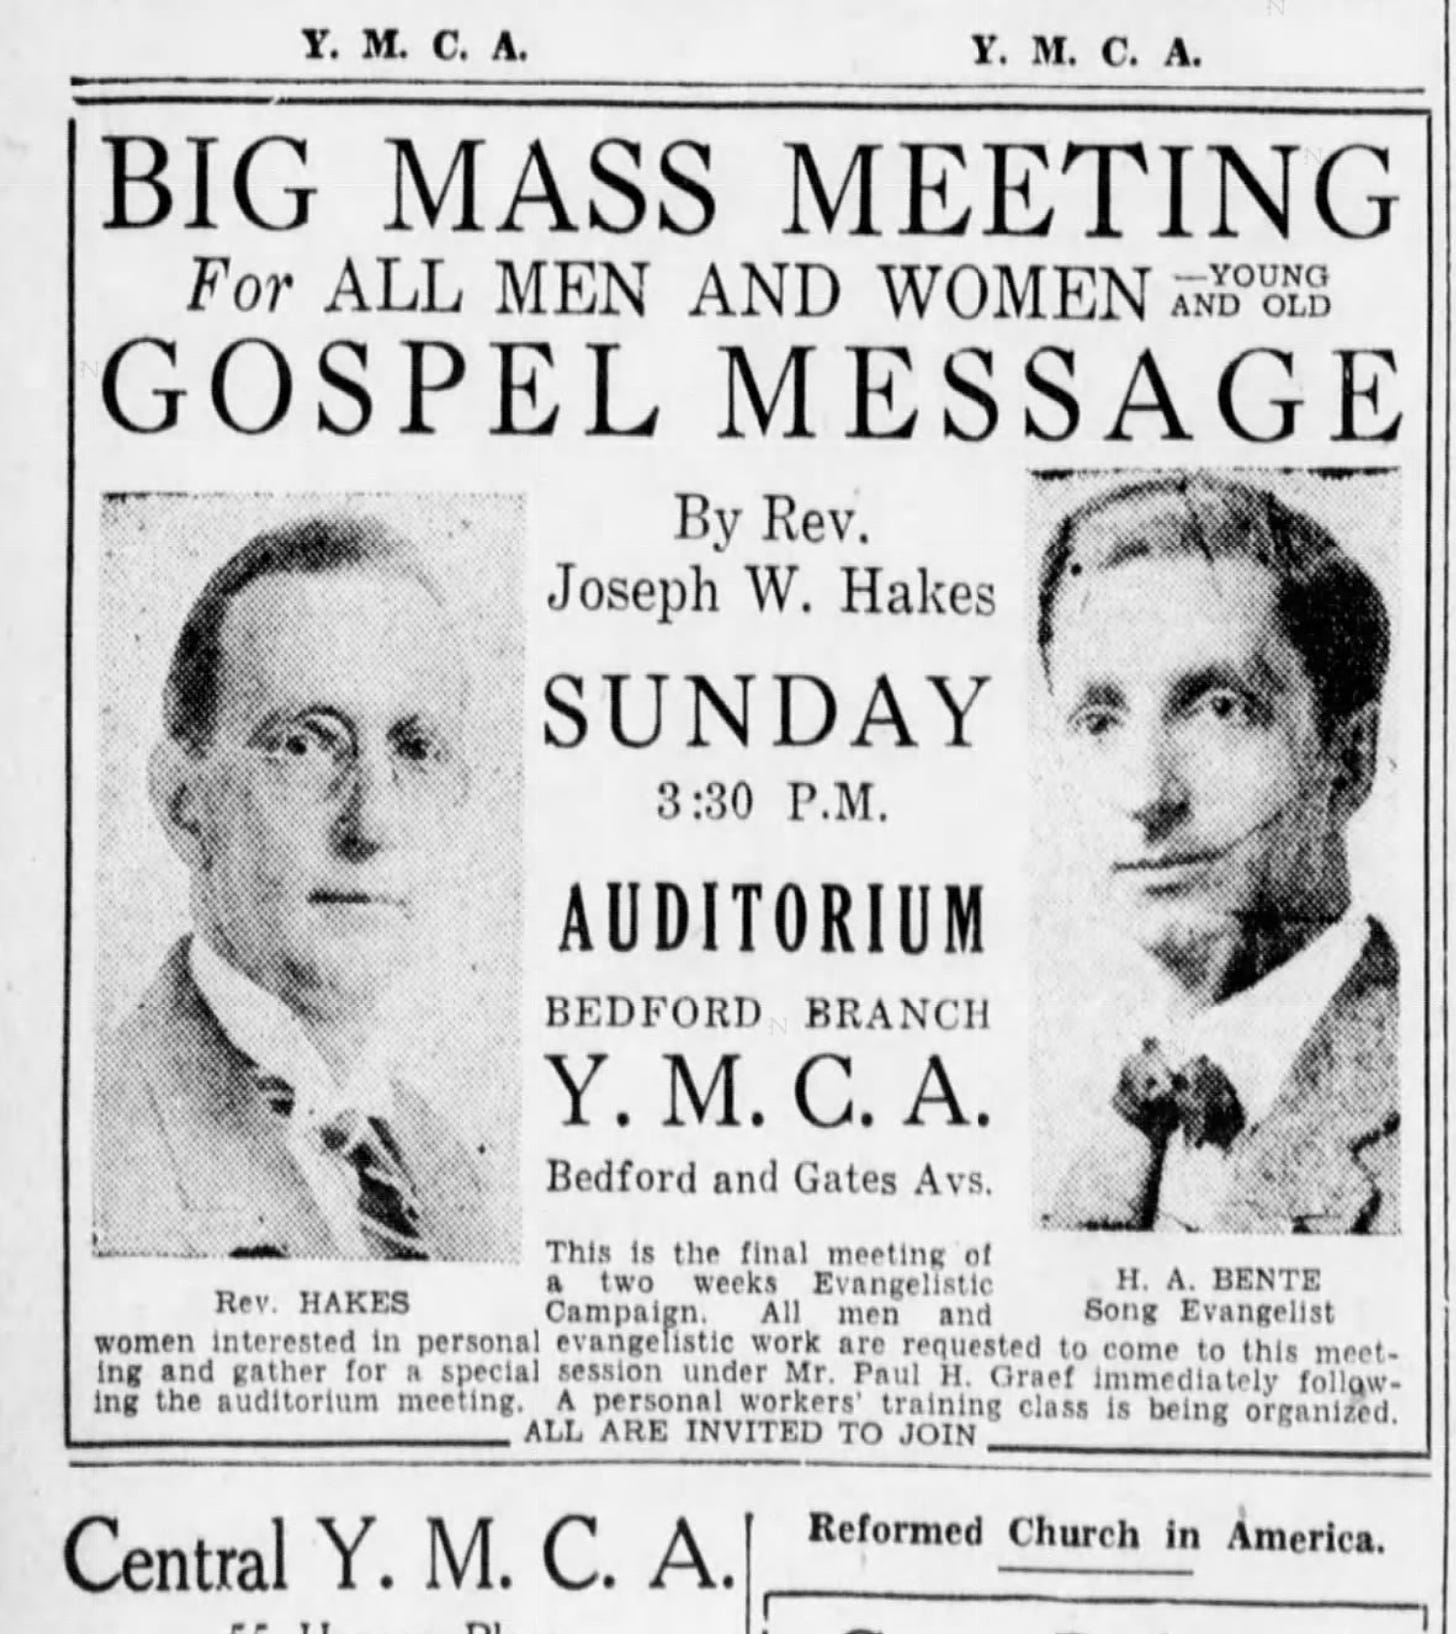 Image shows a newspaper advertisement for a gospel meeting at the YMCA. The image contains information about the meeting and also shows the two preachers featured.